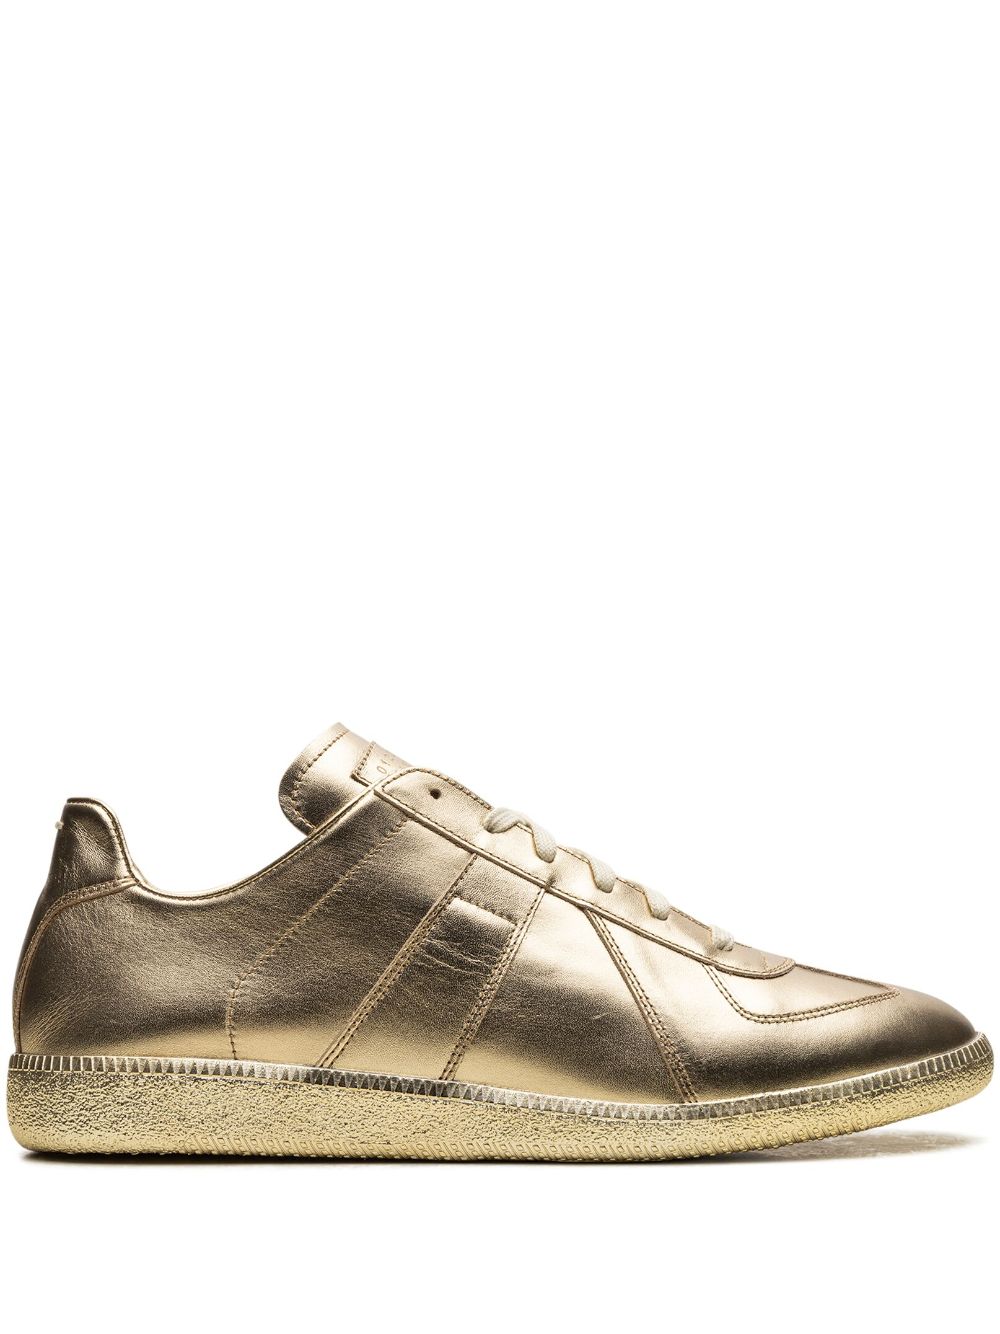 Maison Margiela Replica "Gold Plated" low-top sneakers Goud